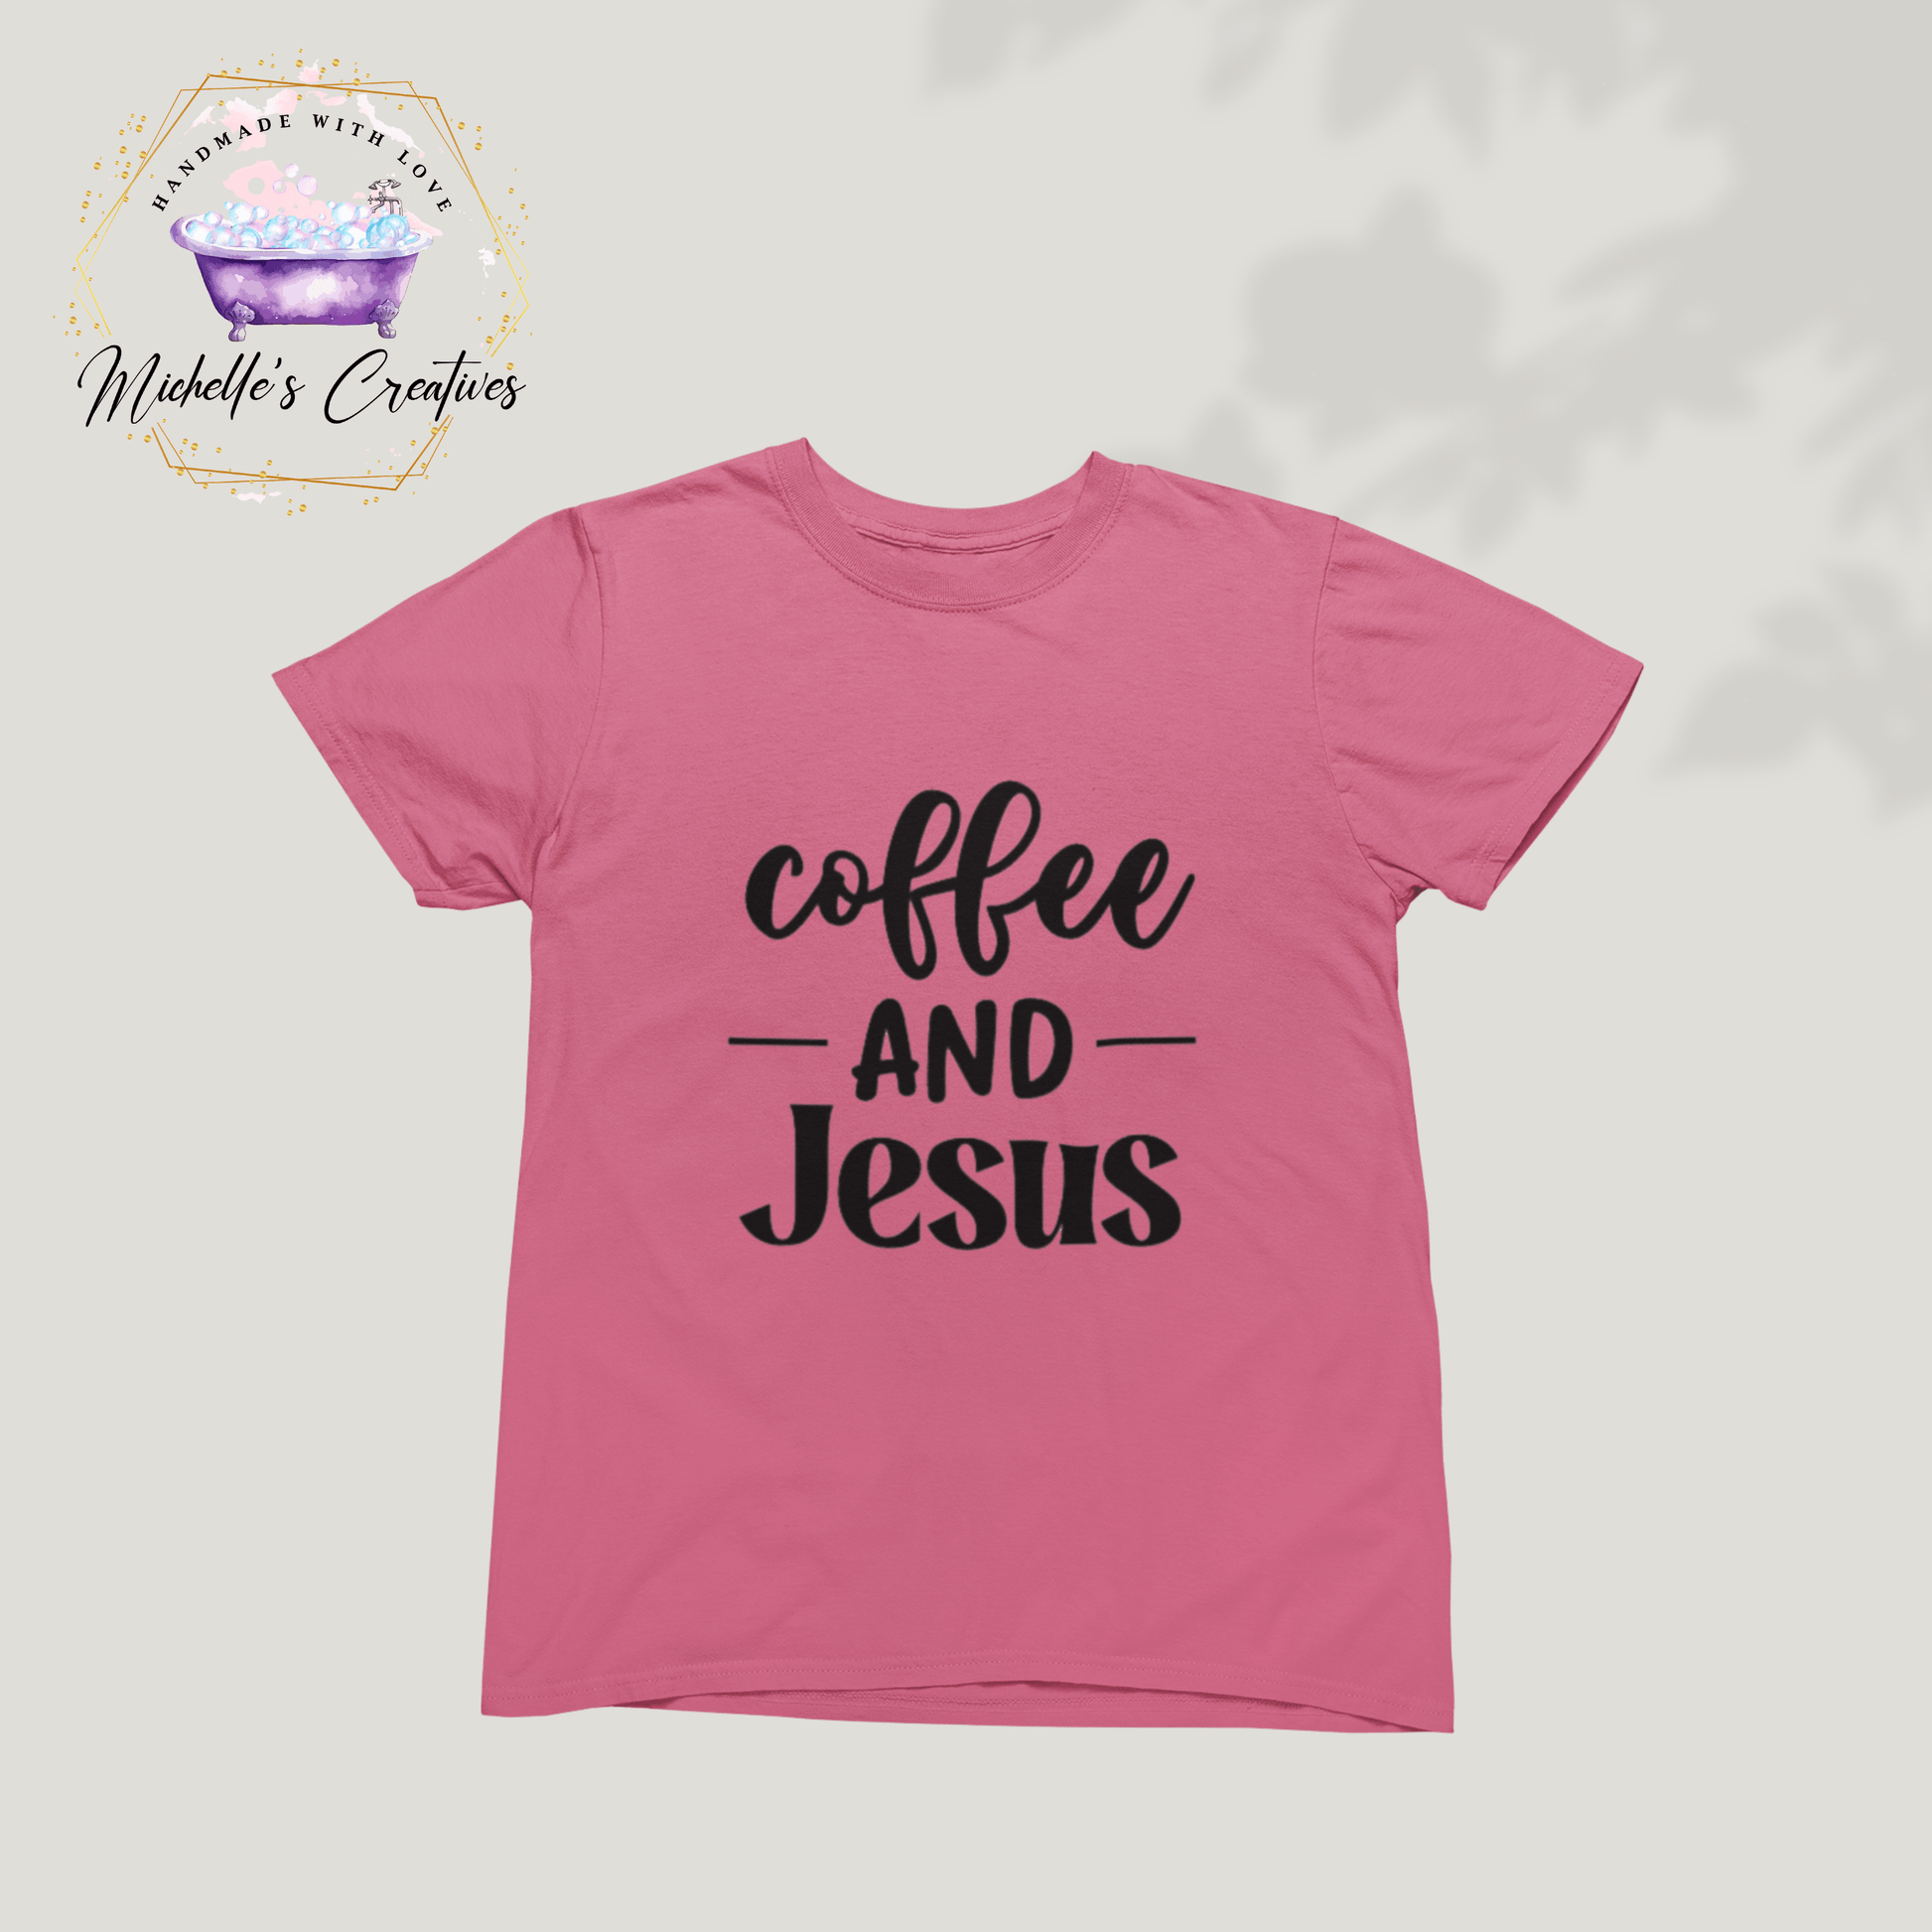 Michelle's Creatives T-shirt Small / Safety Pink ☕🙏 Introducing the Coffee AND Jesus Unisex T-shirt! 🙏☕ COFFEE-AND-JESUS-TSHIRT-3